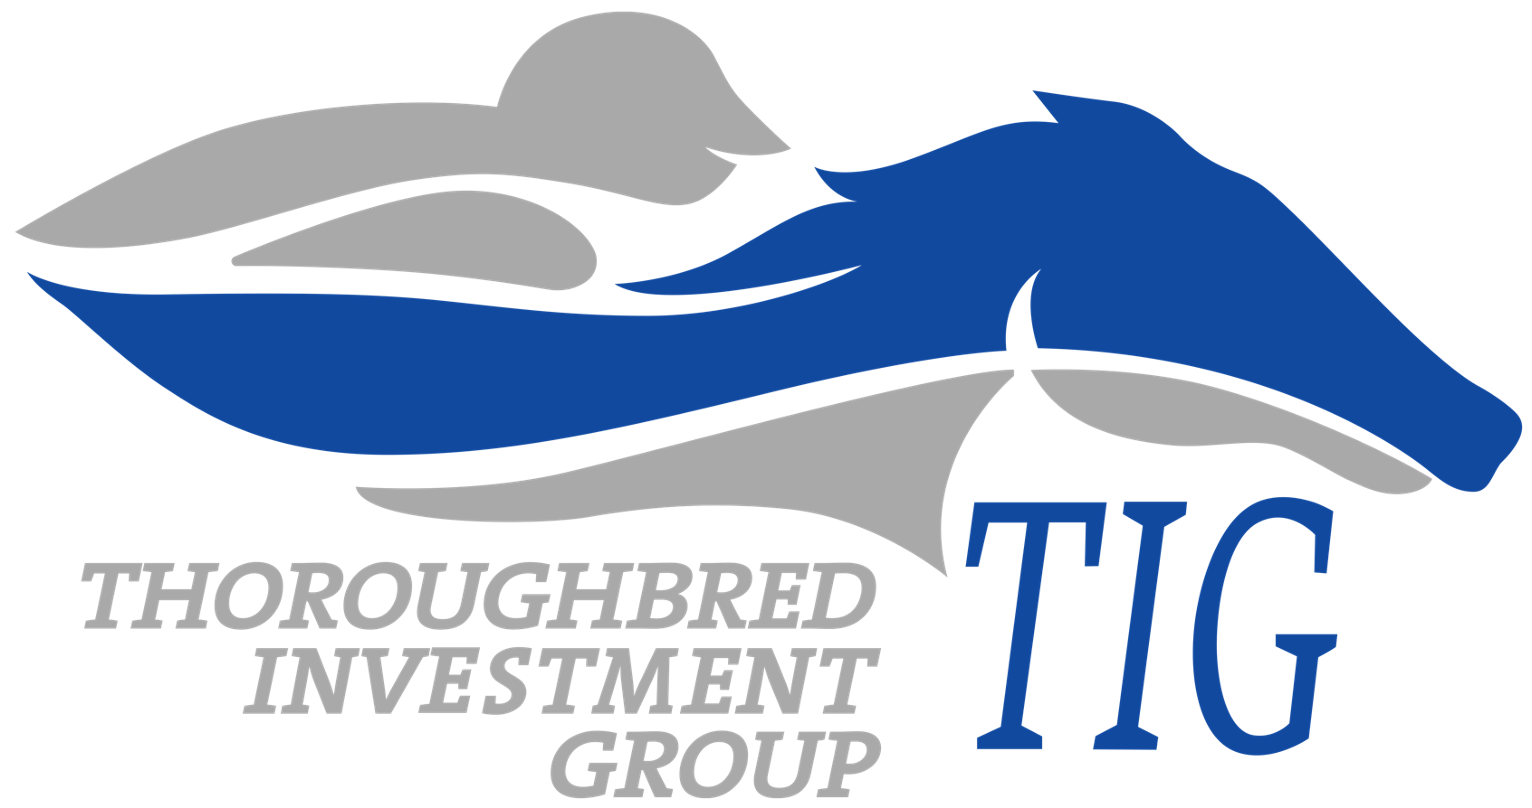 Thoroughbred Investment Group